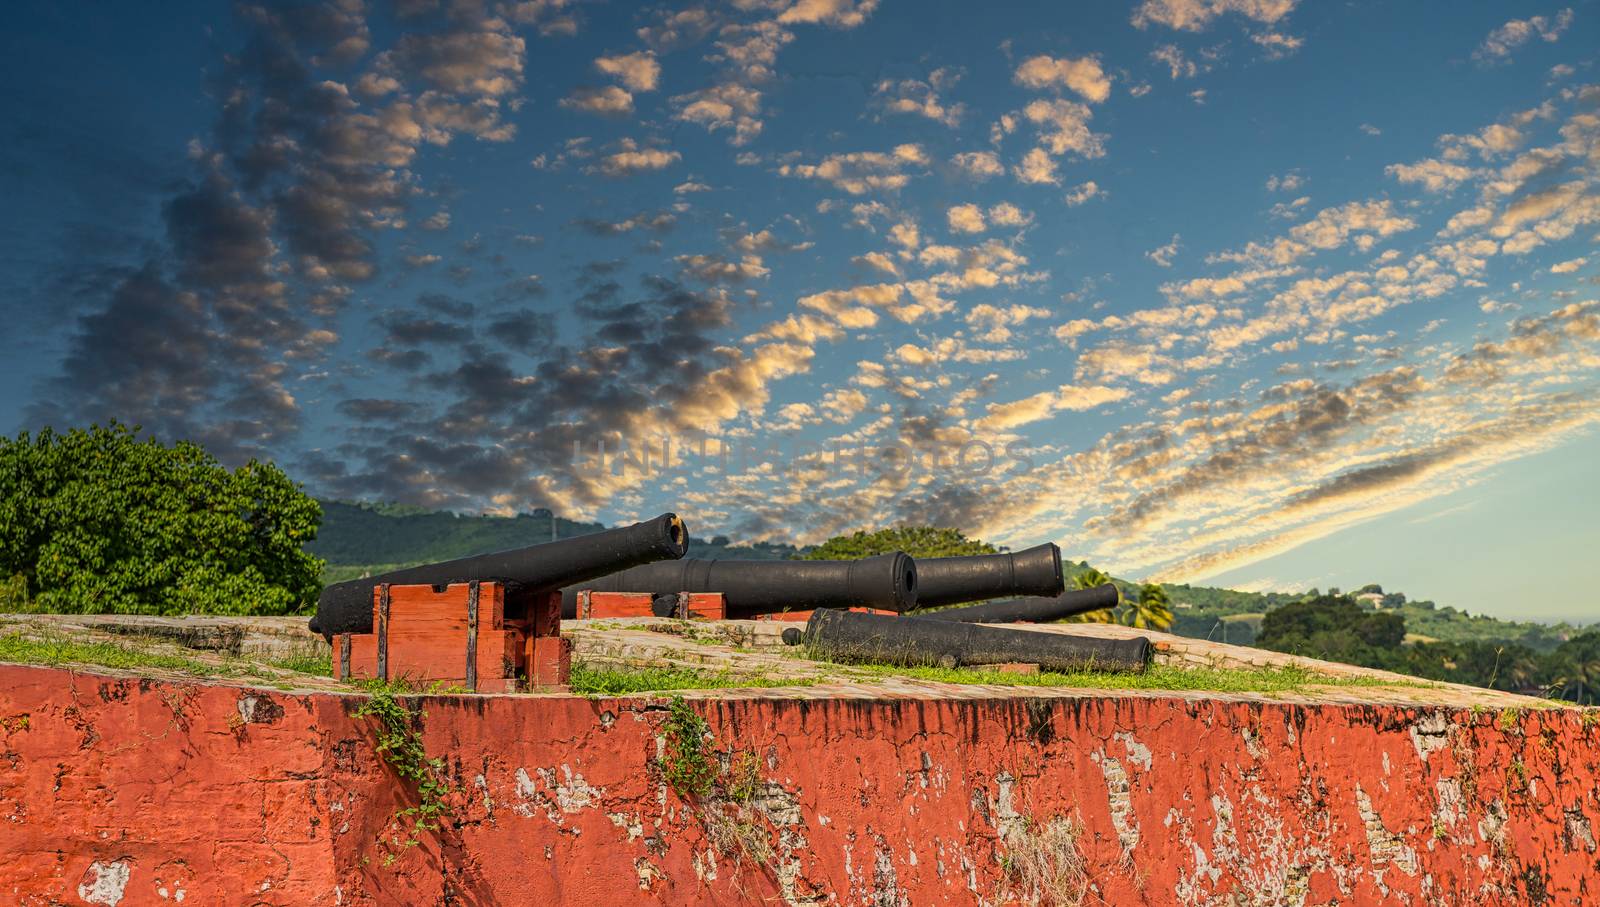 Cannons on Old Red Fort at Sunrise by dbvirago